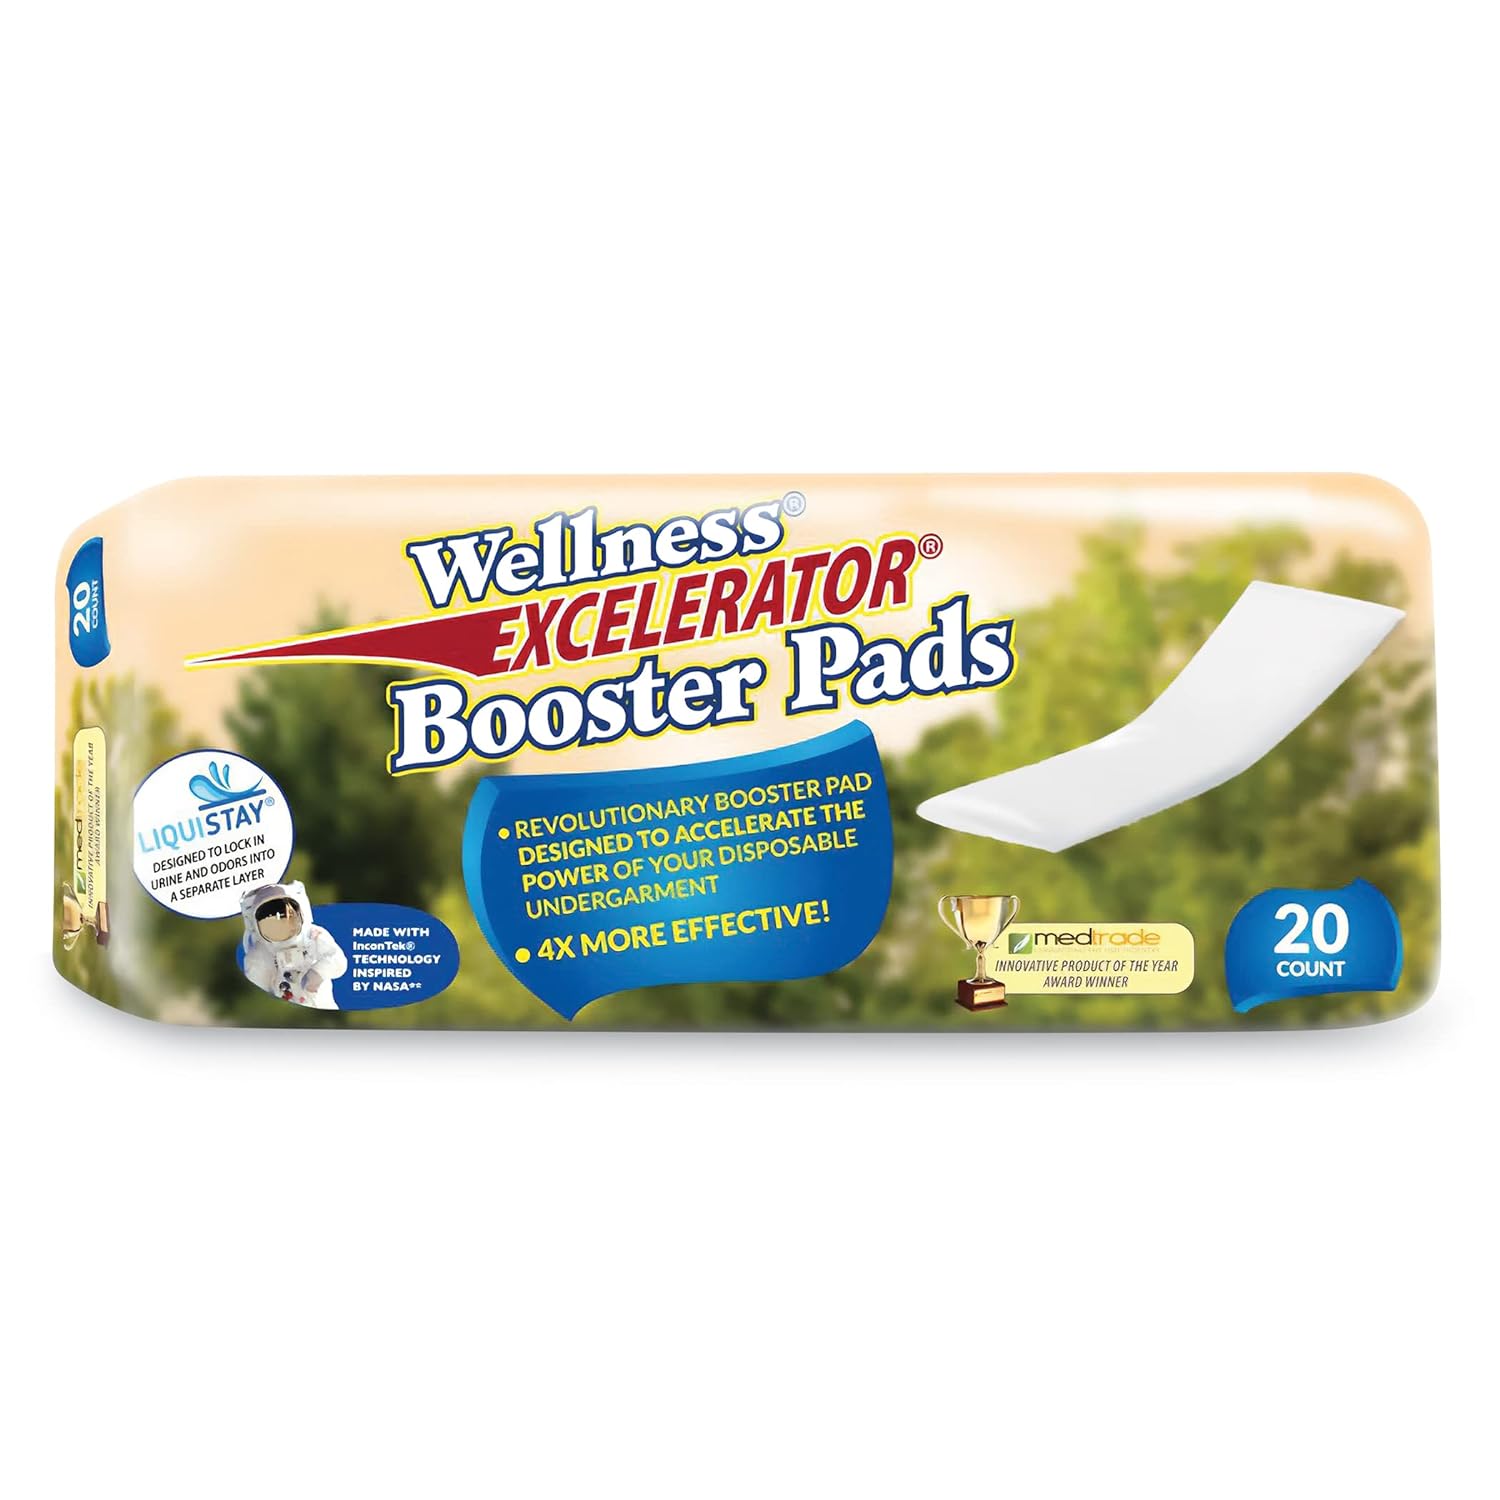 Wellness Excelerator Booster Pad